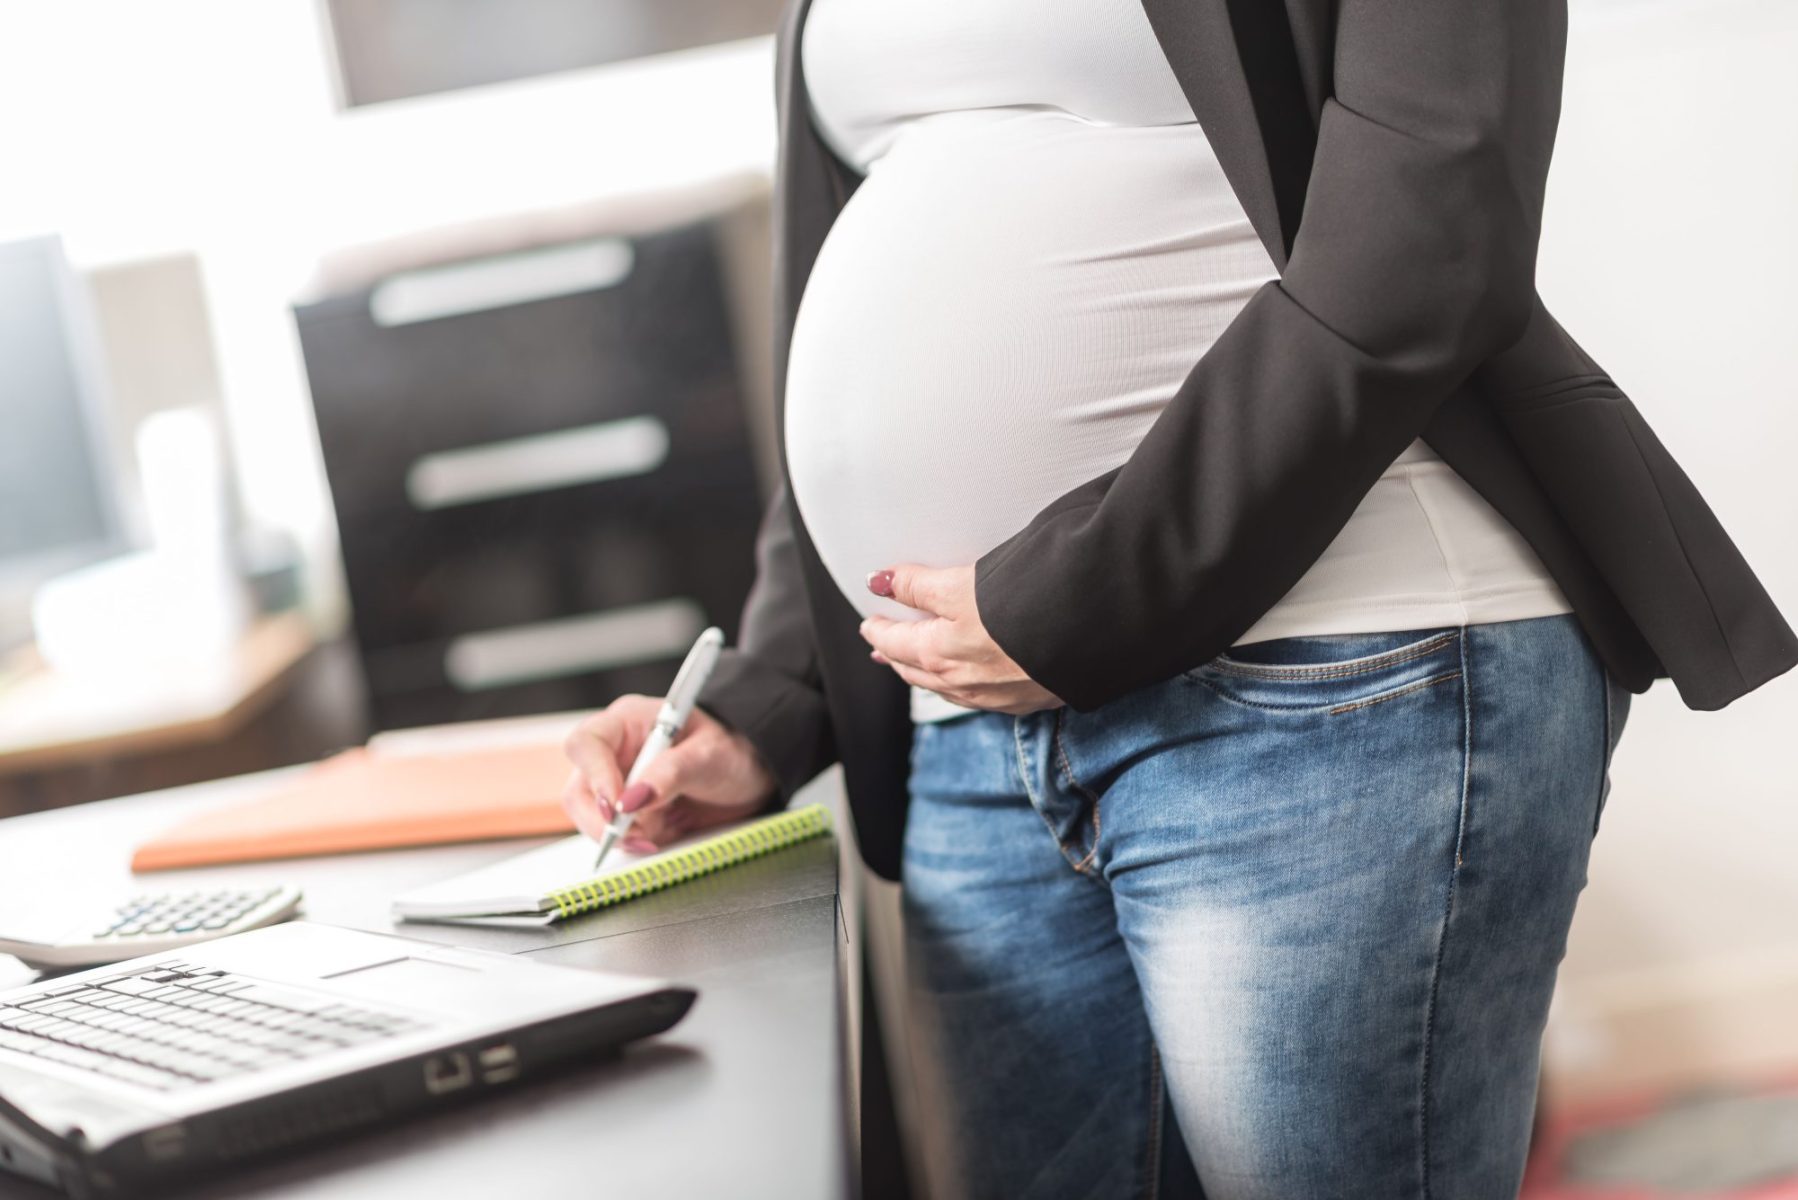 Pregnant woman standing at desk at work to represent Pregnancy Discrimination Attorney Near Chicago when terminated wrongly.